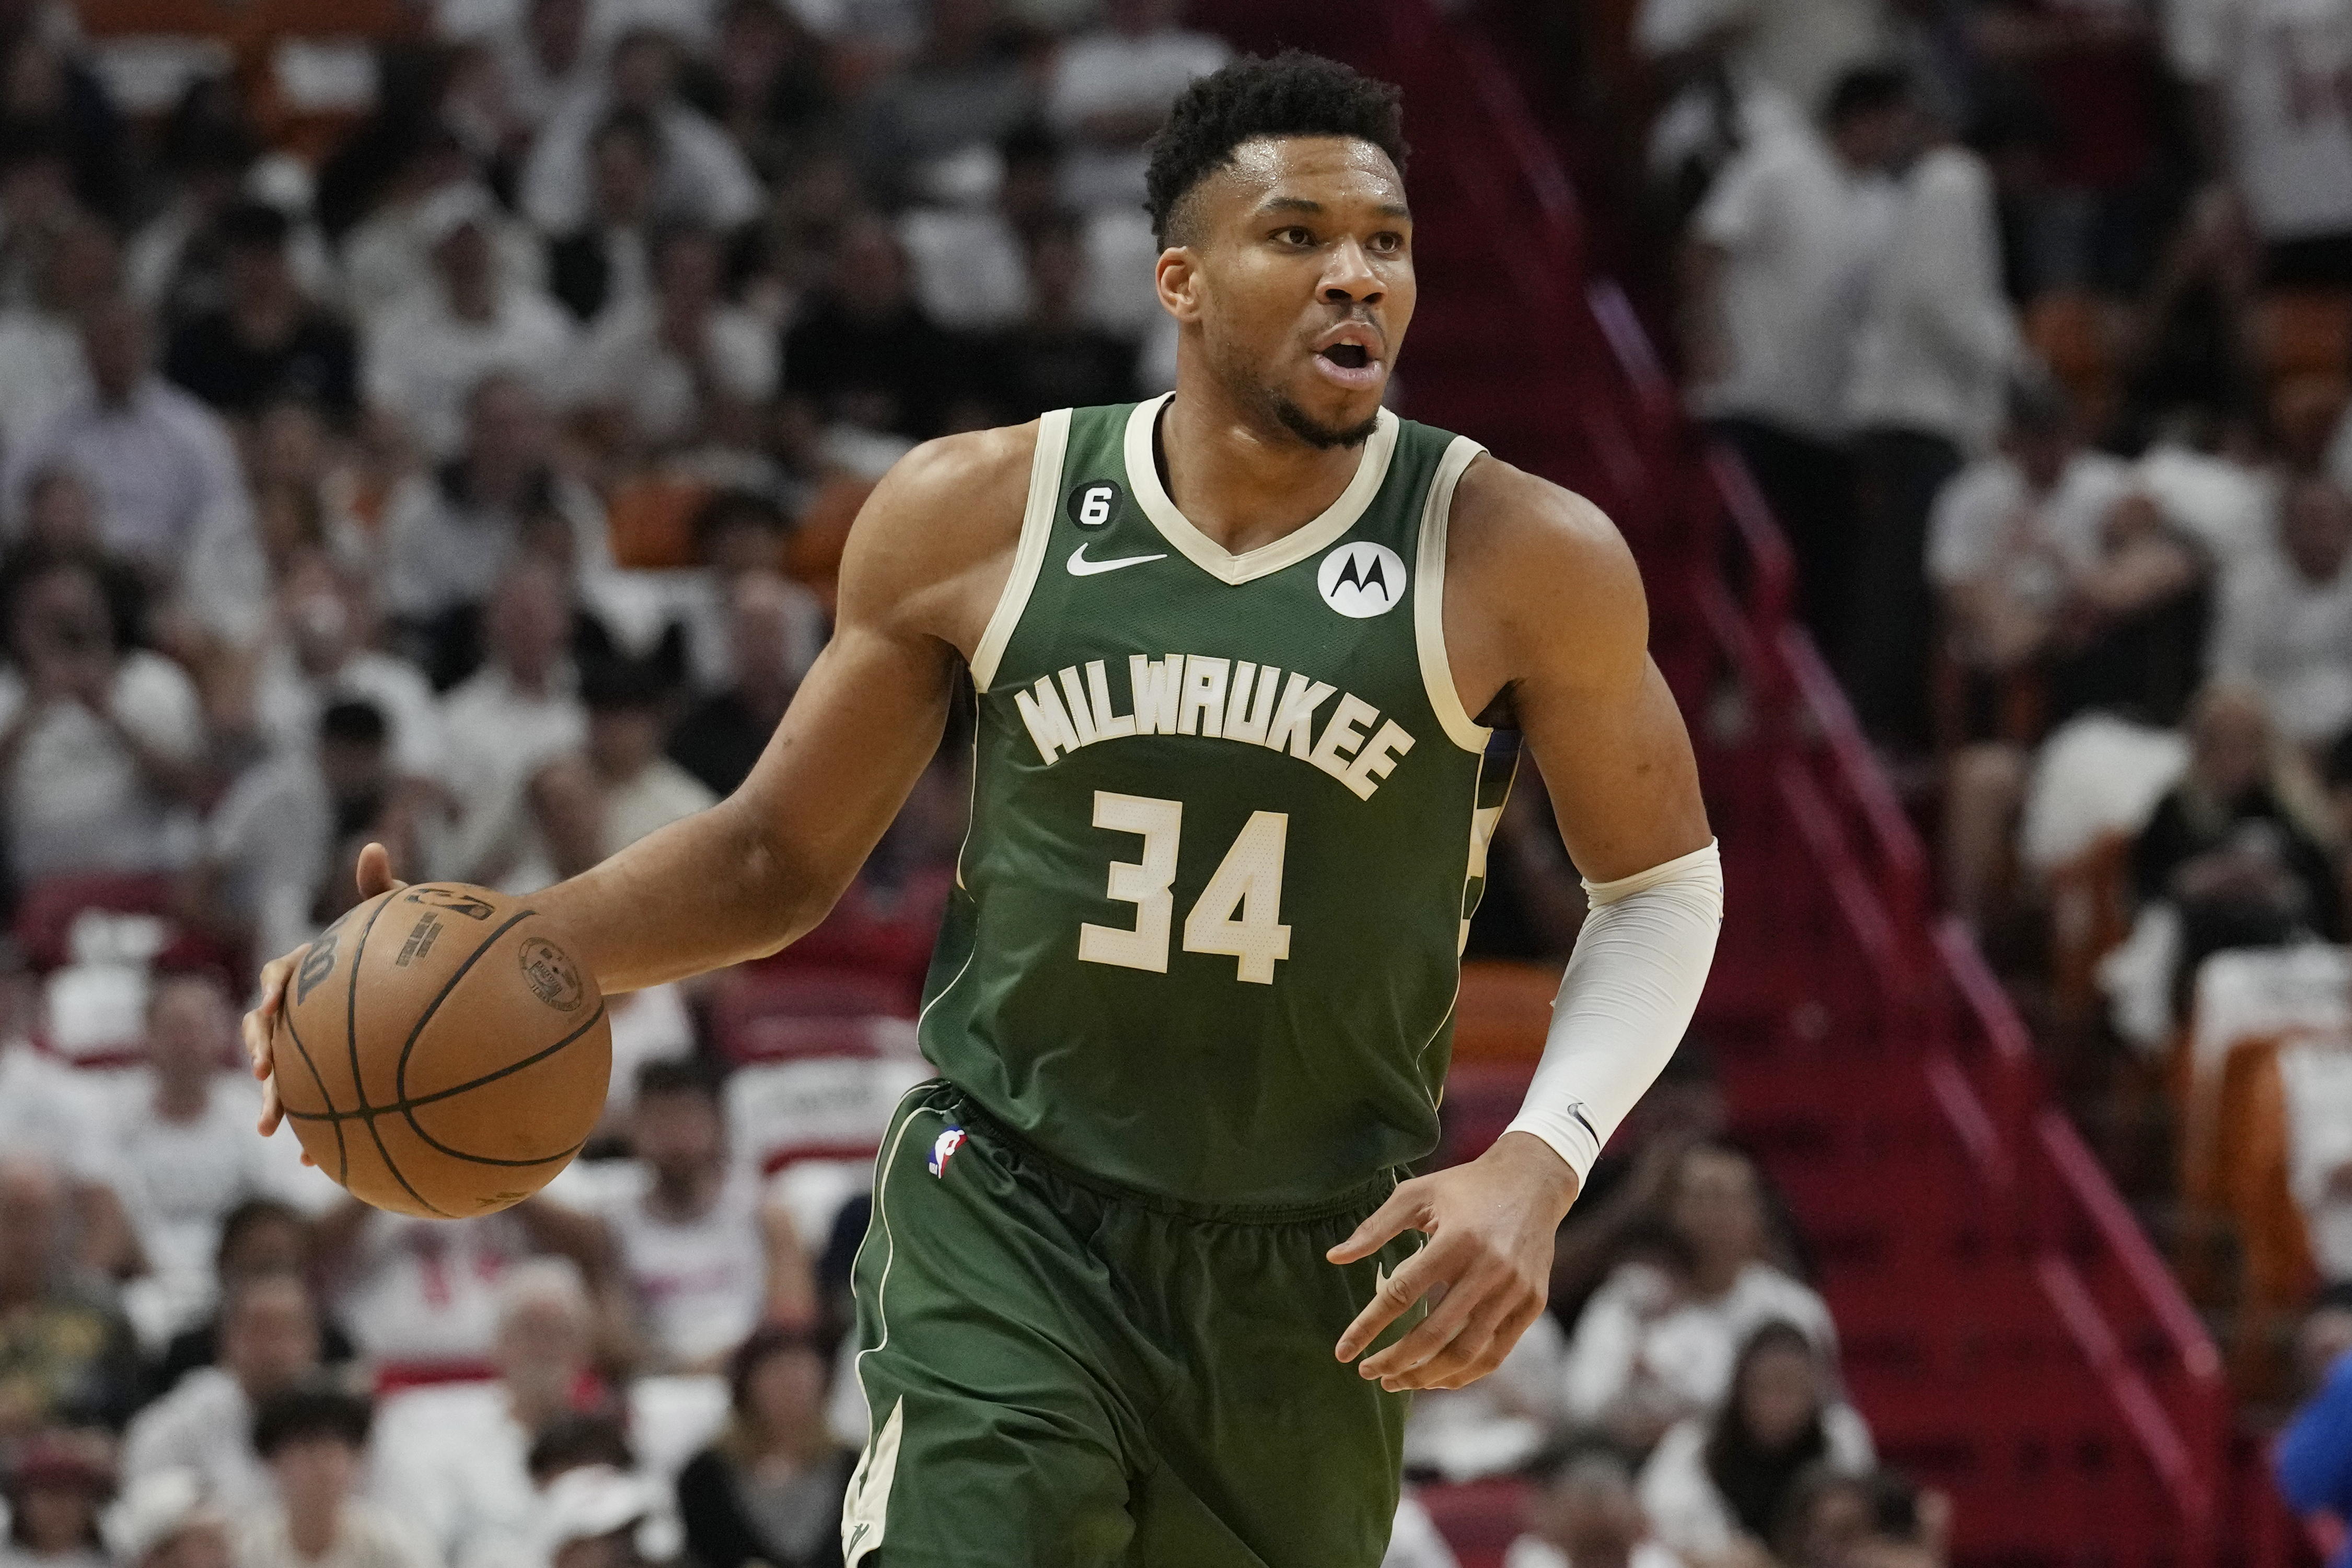 Antetokounmpo wants to see how committed Bucks are to winning a title  before deciding on extension